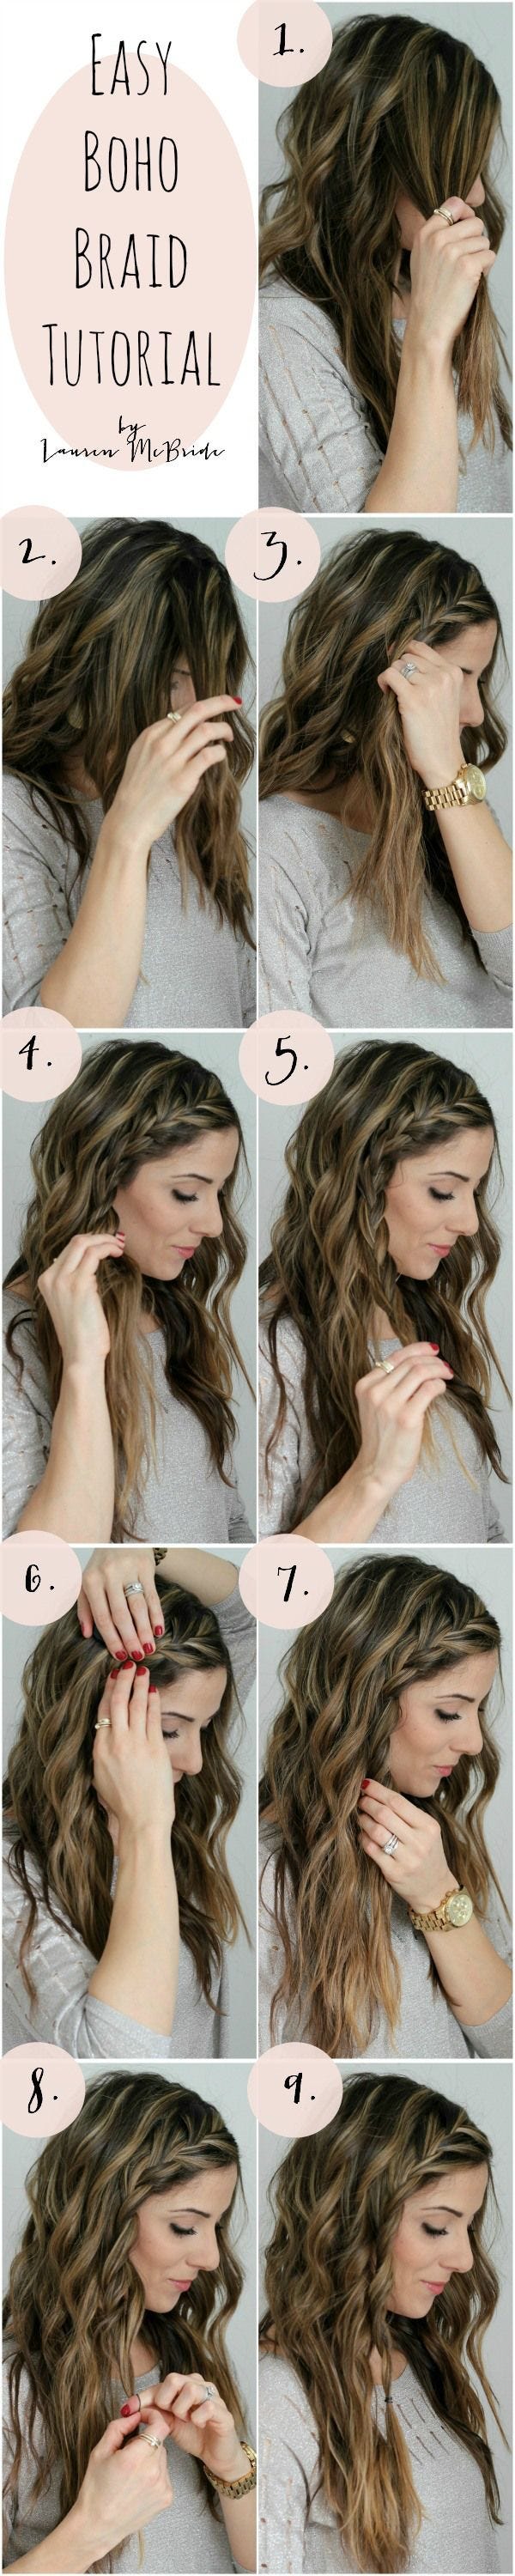 5 Basic Braids For Beginners - Easy & Simple - Everyday Hair inspiration